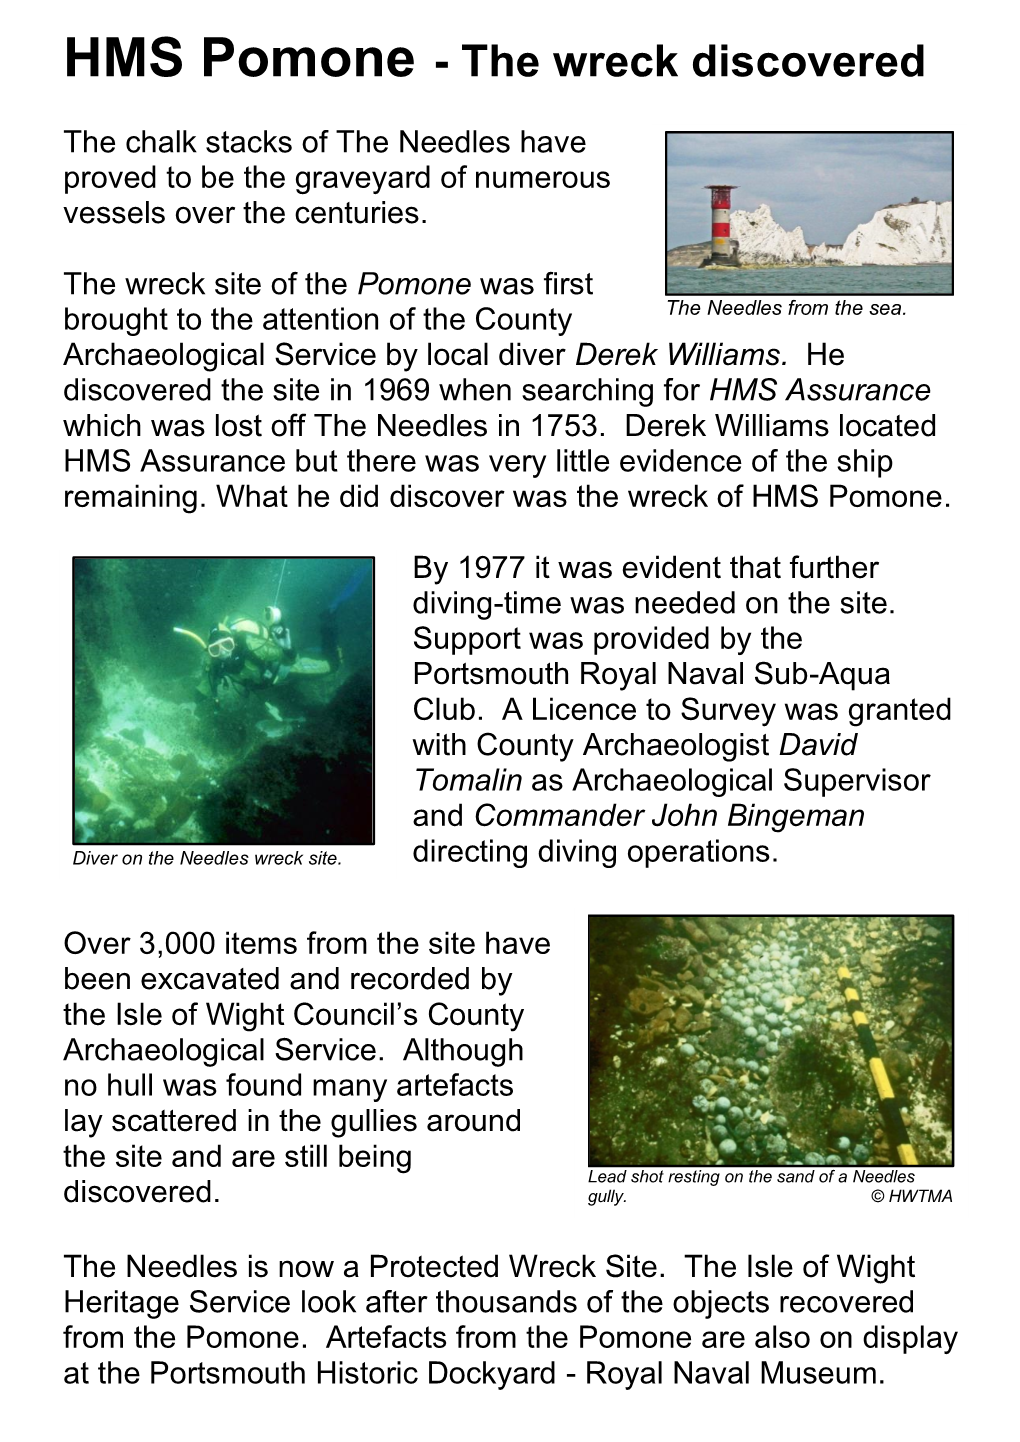 HMS Pomone - the Wreck Discovered